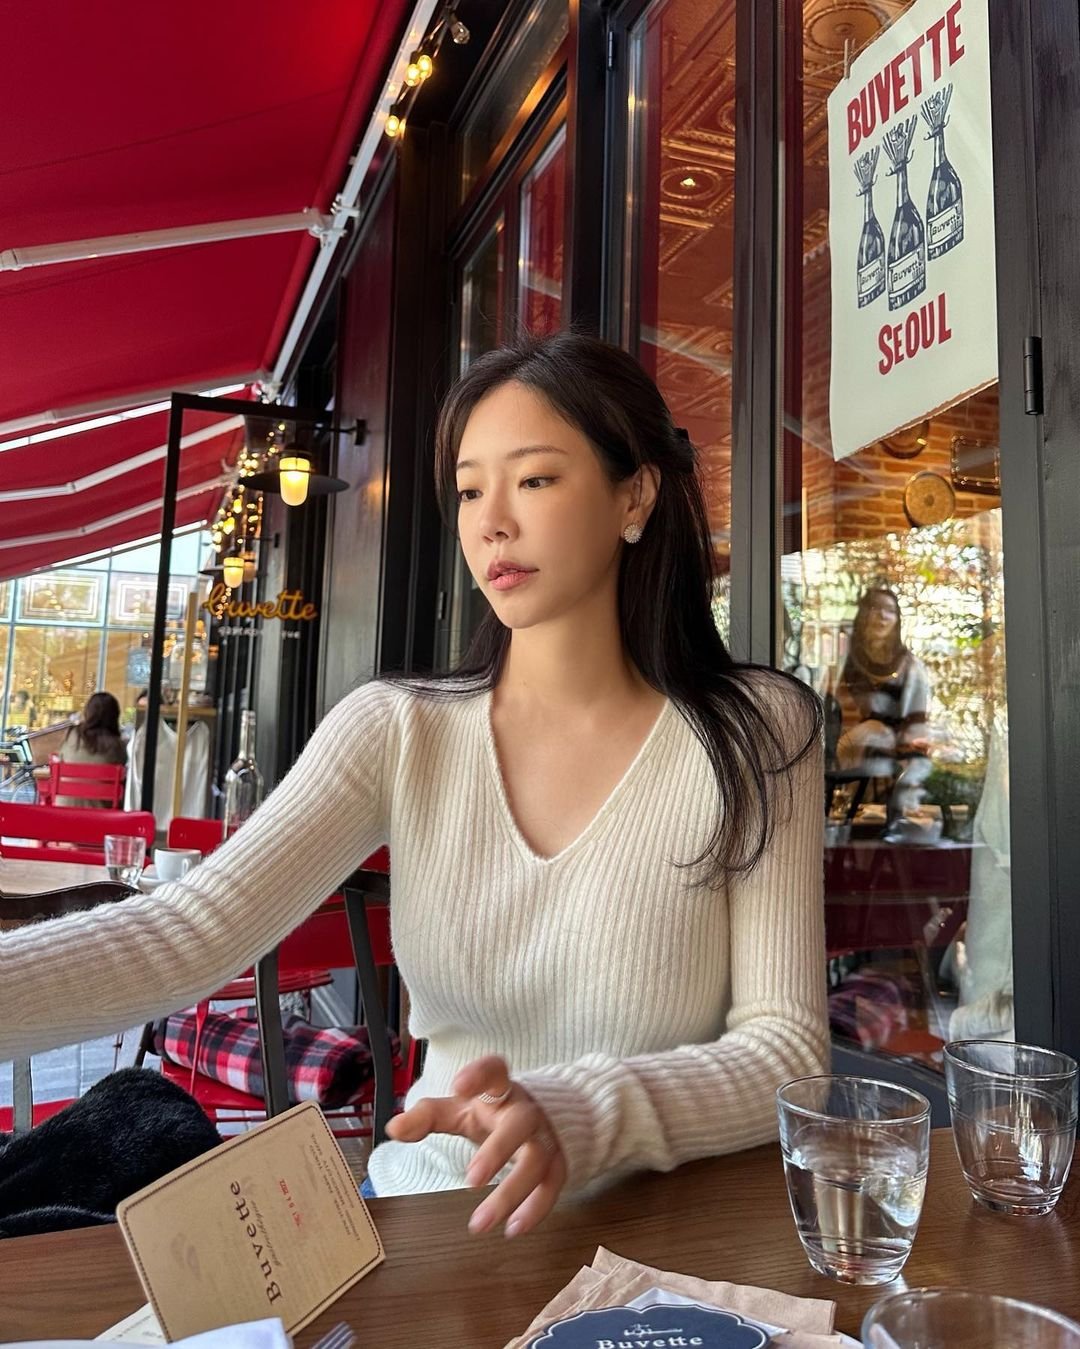 My name is Belle. I am 32 years old. Nice to meet you. I am from Taiwan and now I am in Seoul.    https://t.co/jEzg6vSpTY